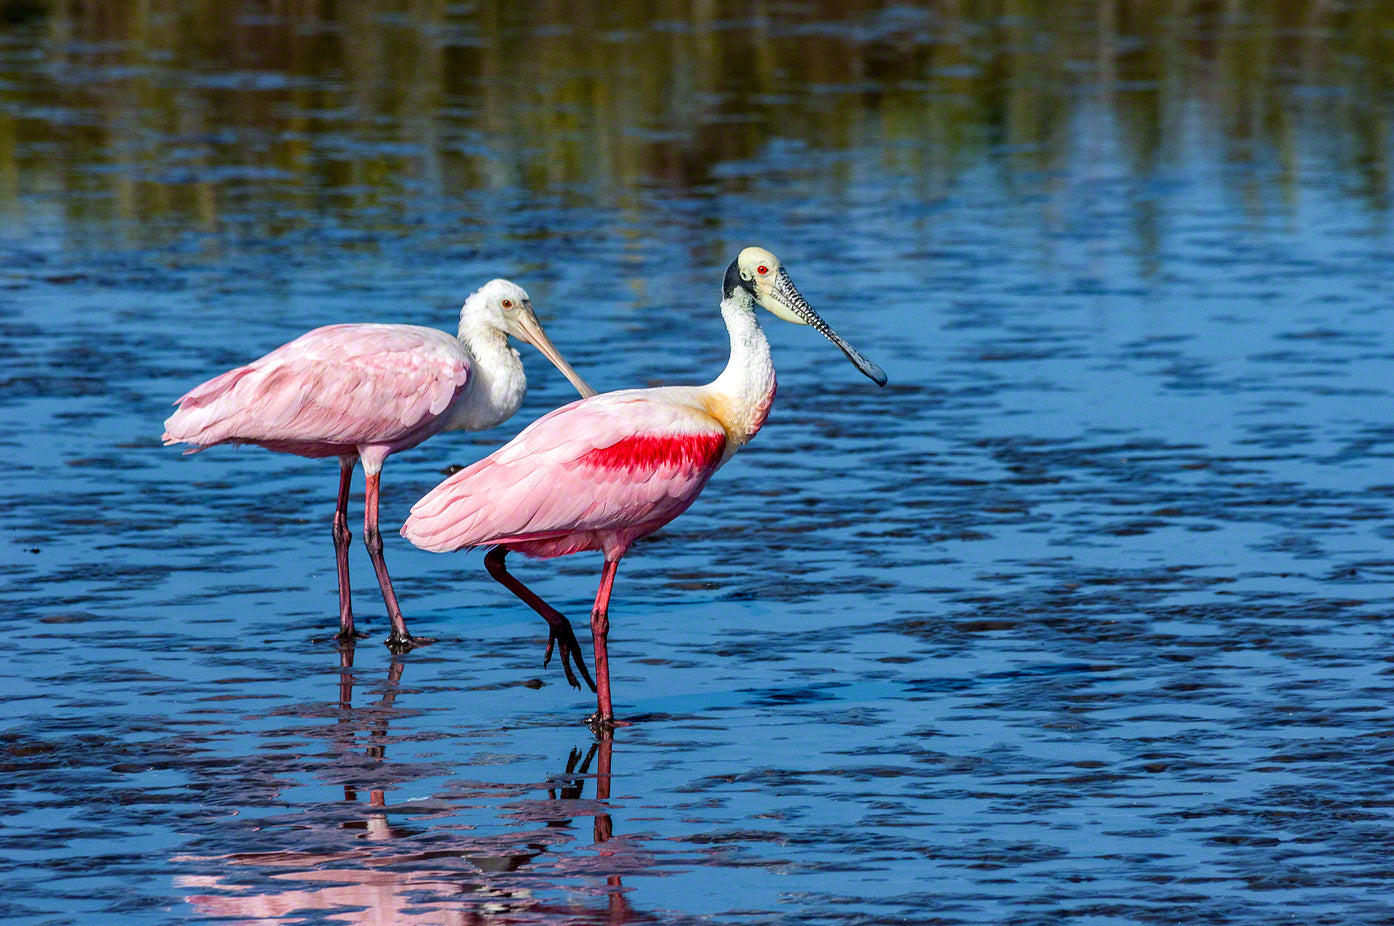 A photo of a pair of roseate spoonbills